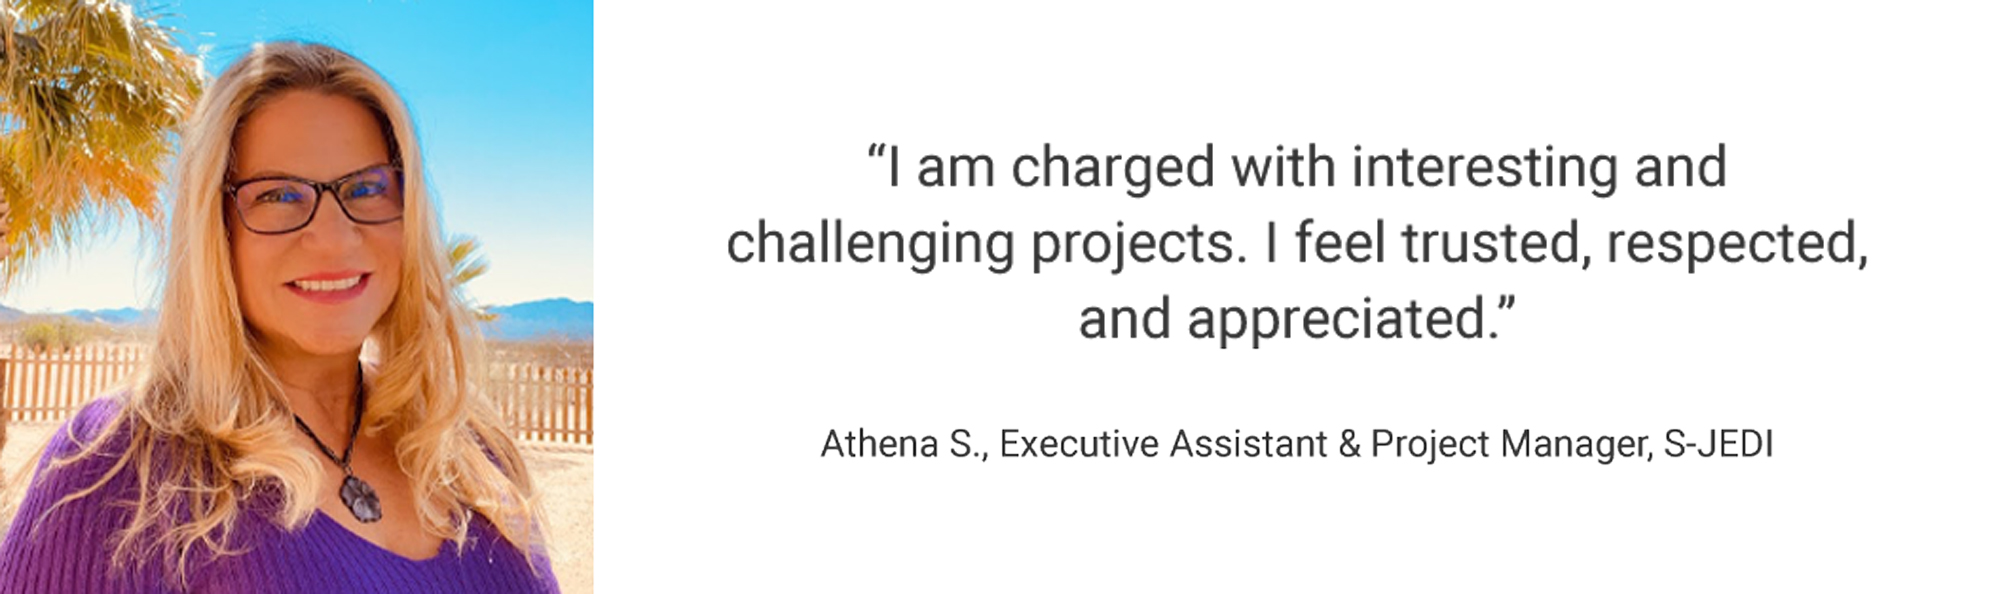 Employee Testimonial, "I am charged with interesting and challenging projects. I feel trusted, respected, and appreciated." Athena S, Executive Assistant & Project Manager, S-JEDI